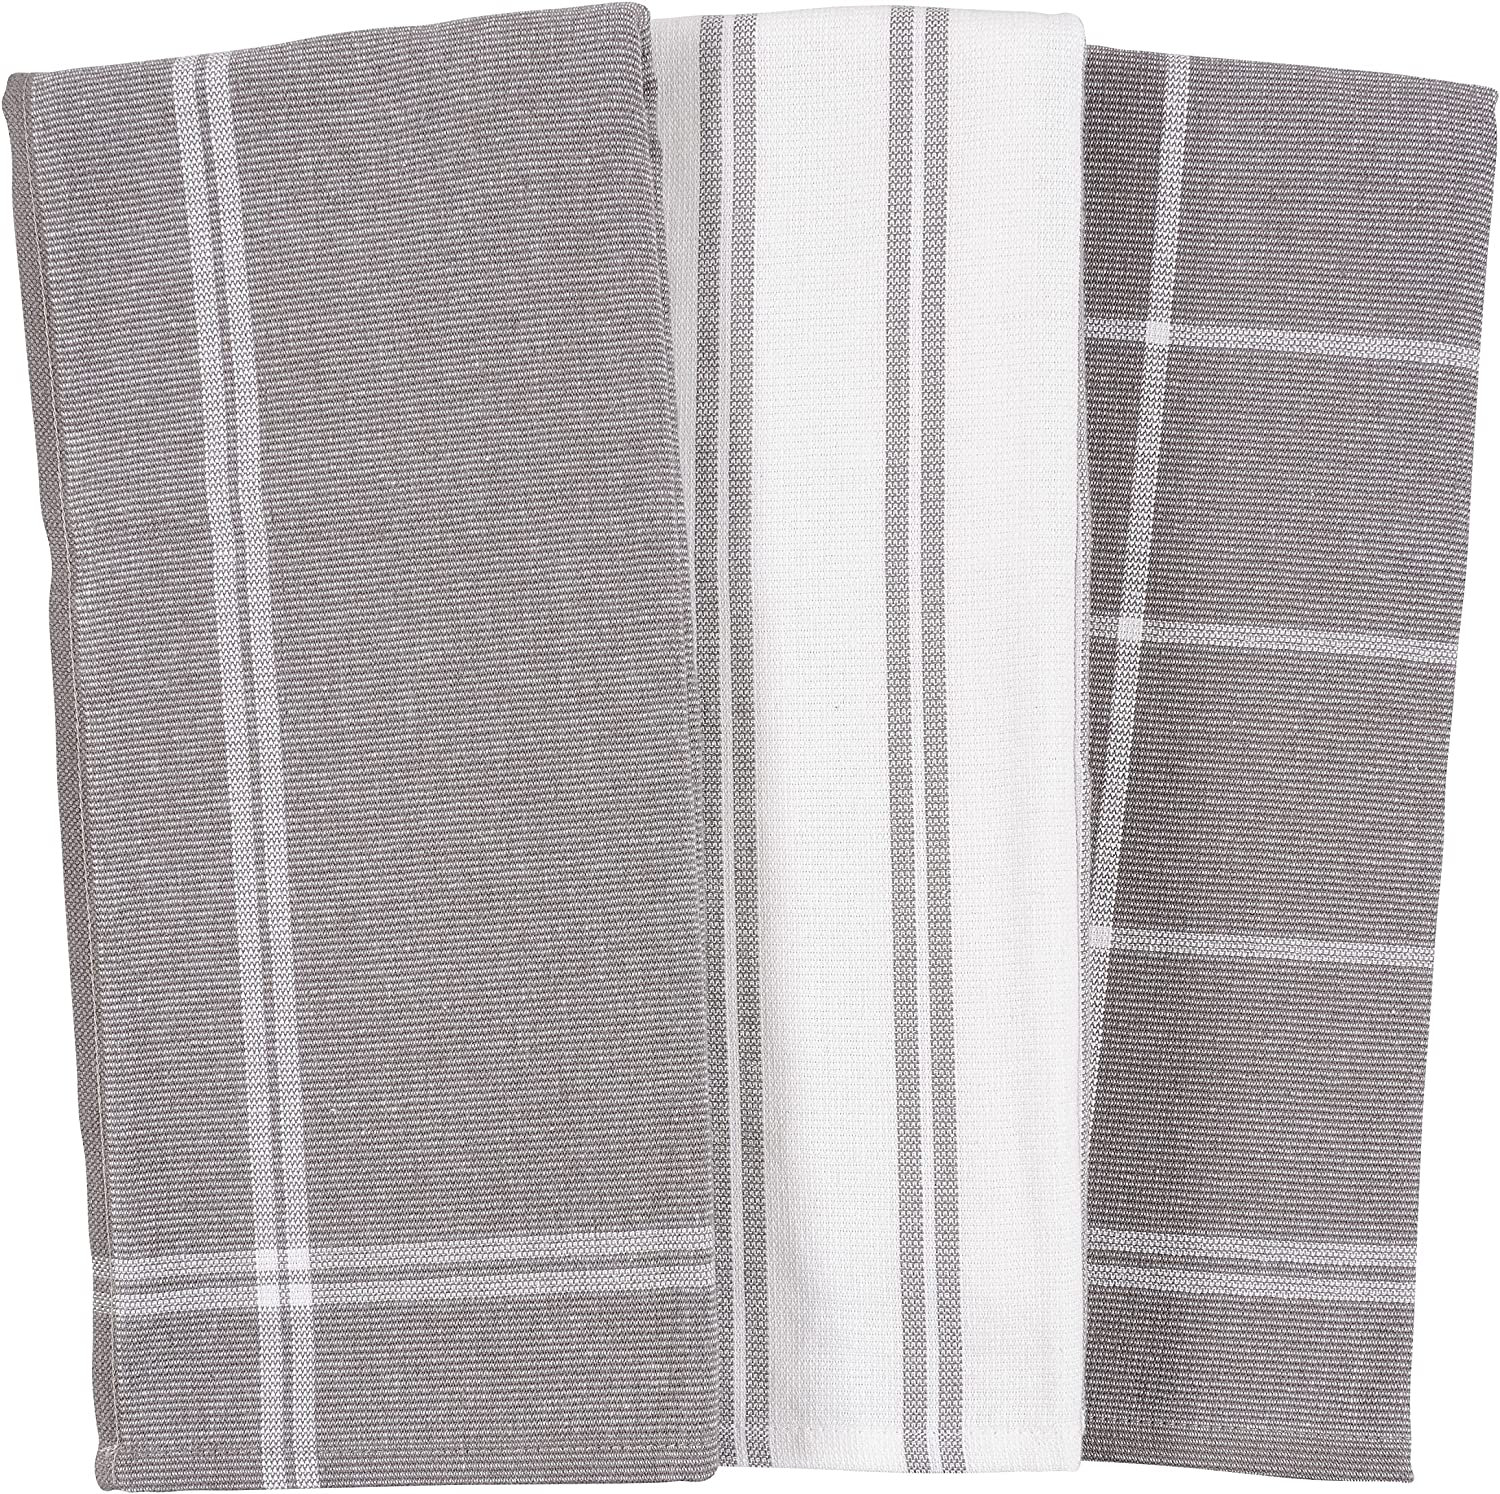 Thyme & Table Cotton Waffle Kitchen Towels, Blue White, 3-Piece Set